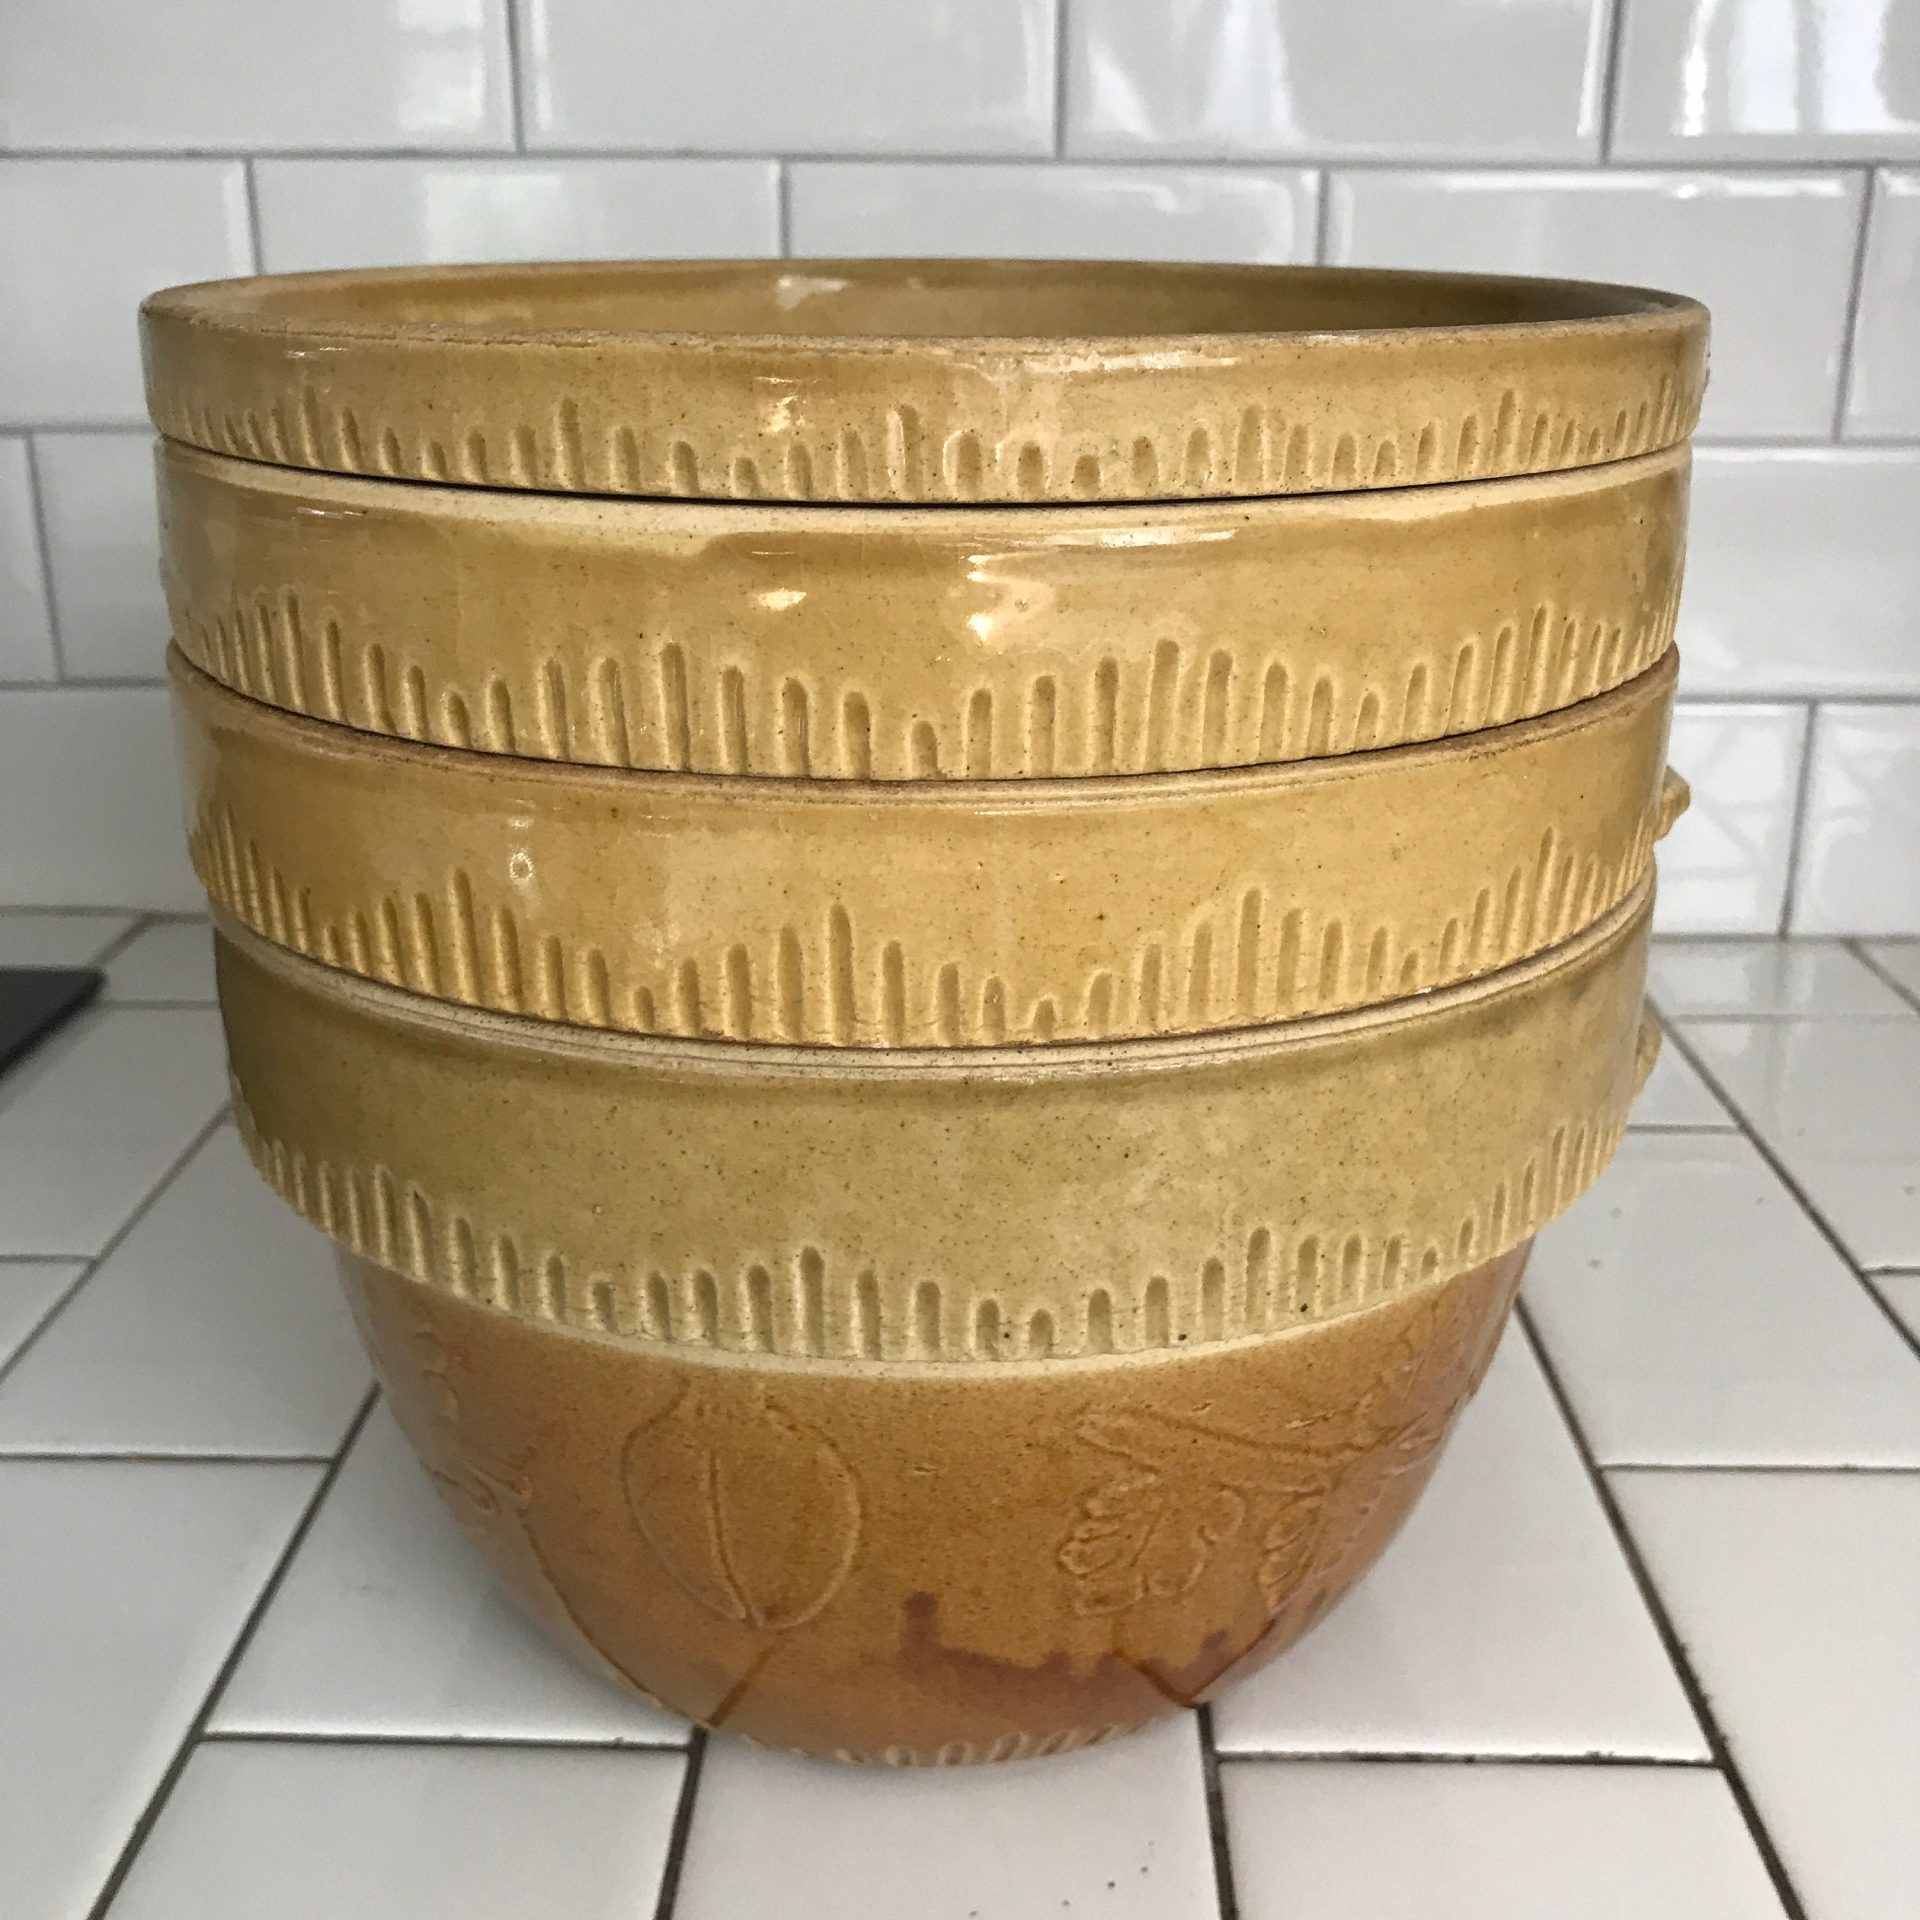 https://www.truevintageantiques.com/wp-content/uploads/2021/11/antique-heavy-pottery-crock-set-of-3-batter-bowls-mixing-bowls-and-pie-plate-lid-cook-rite-usa-farmhouse-collectible-display-patterned-bowls-61a29b091-scaled.jpg